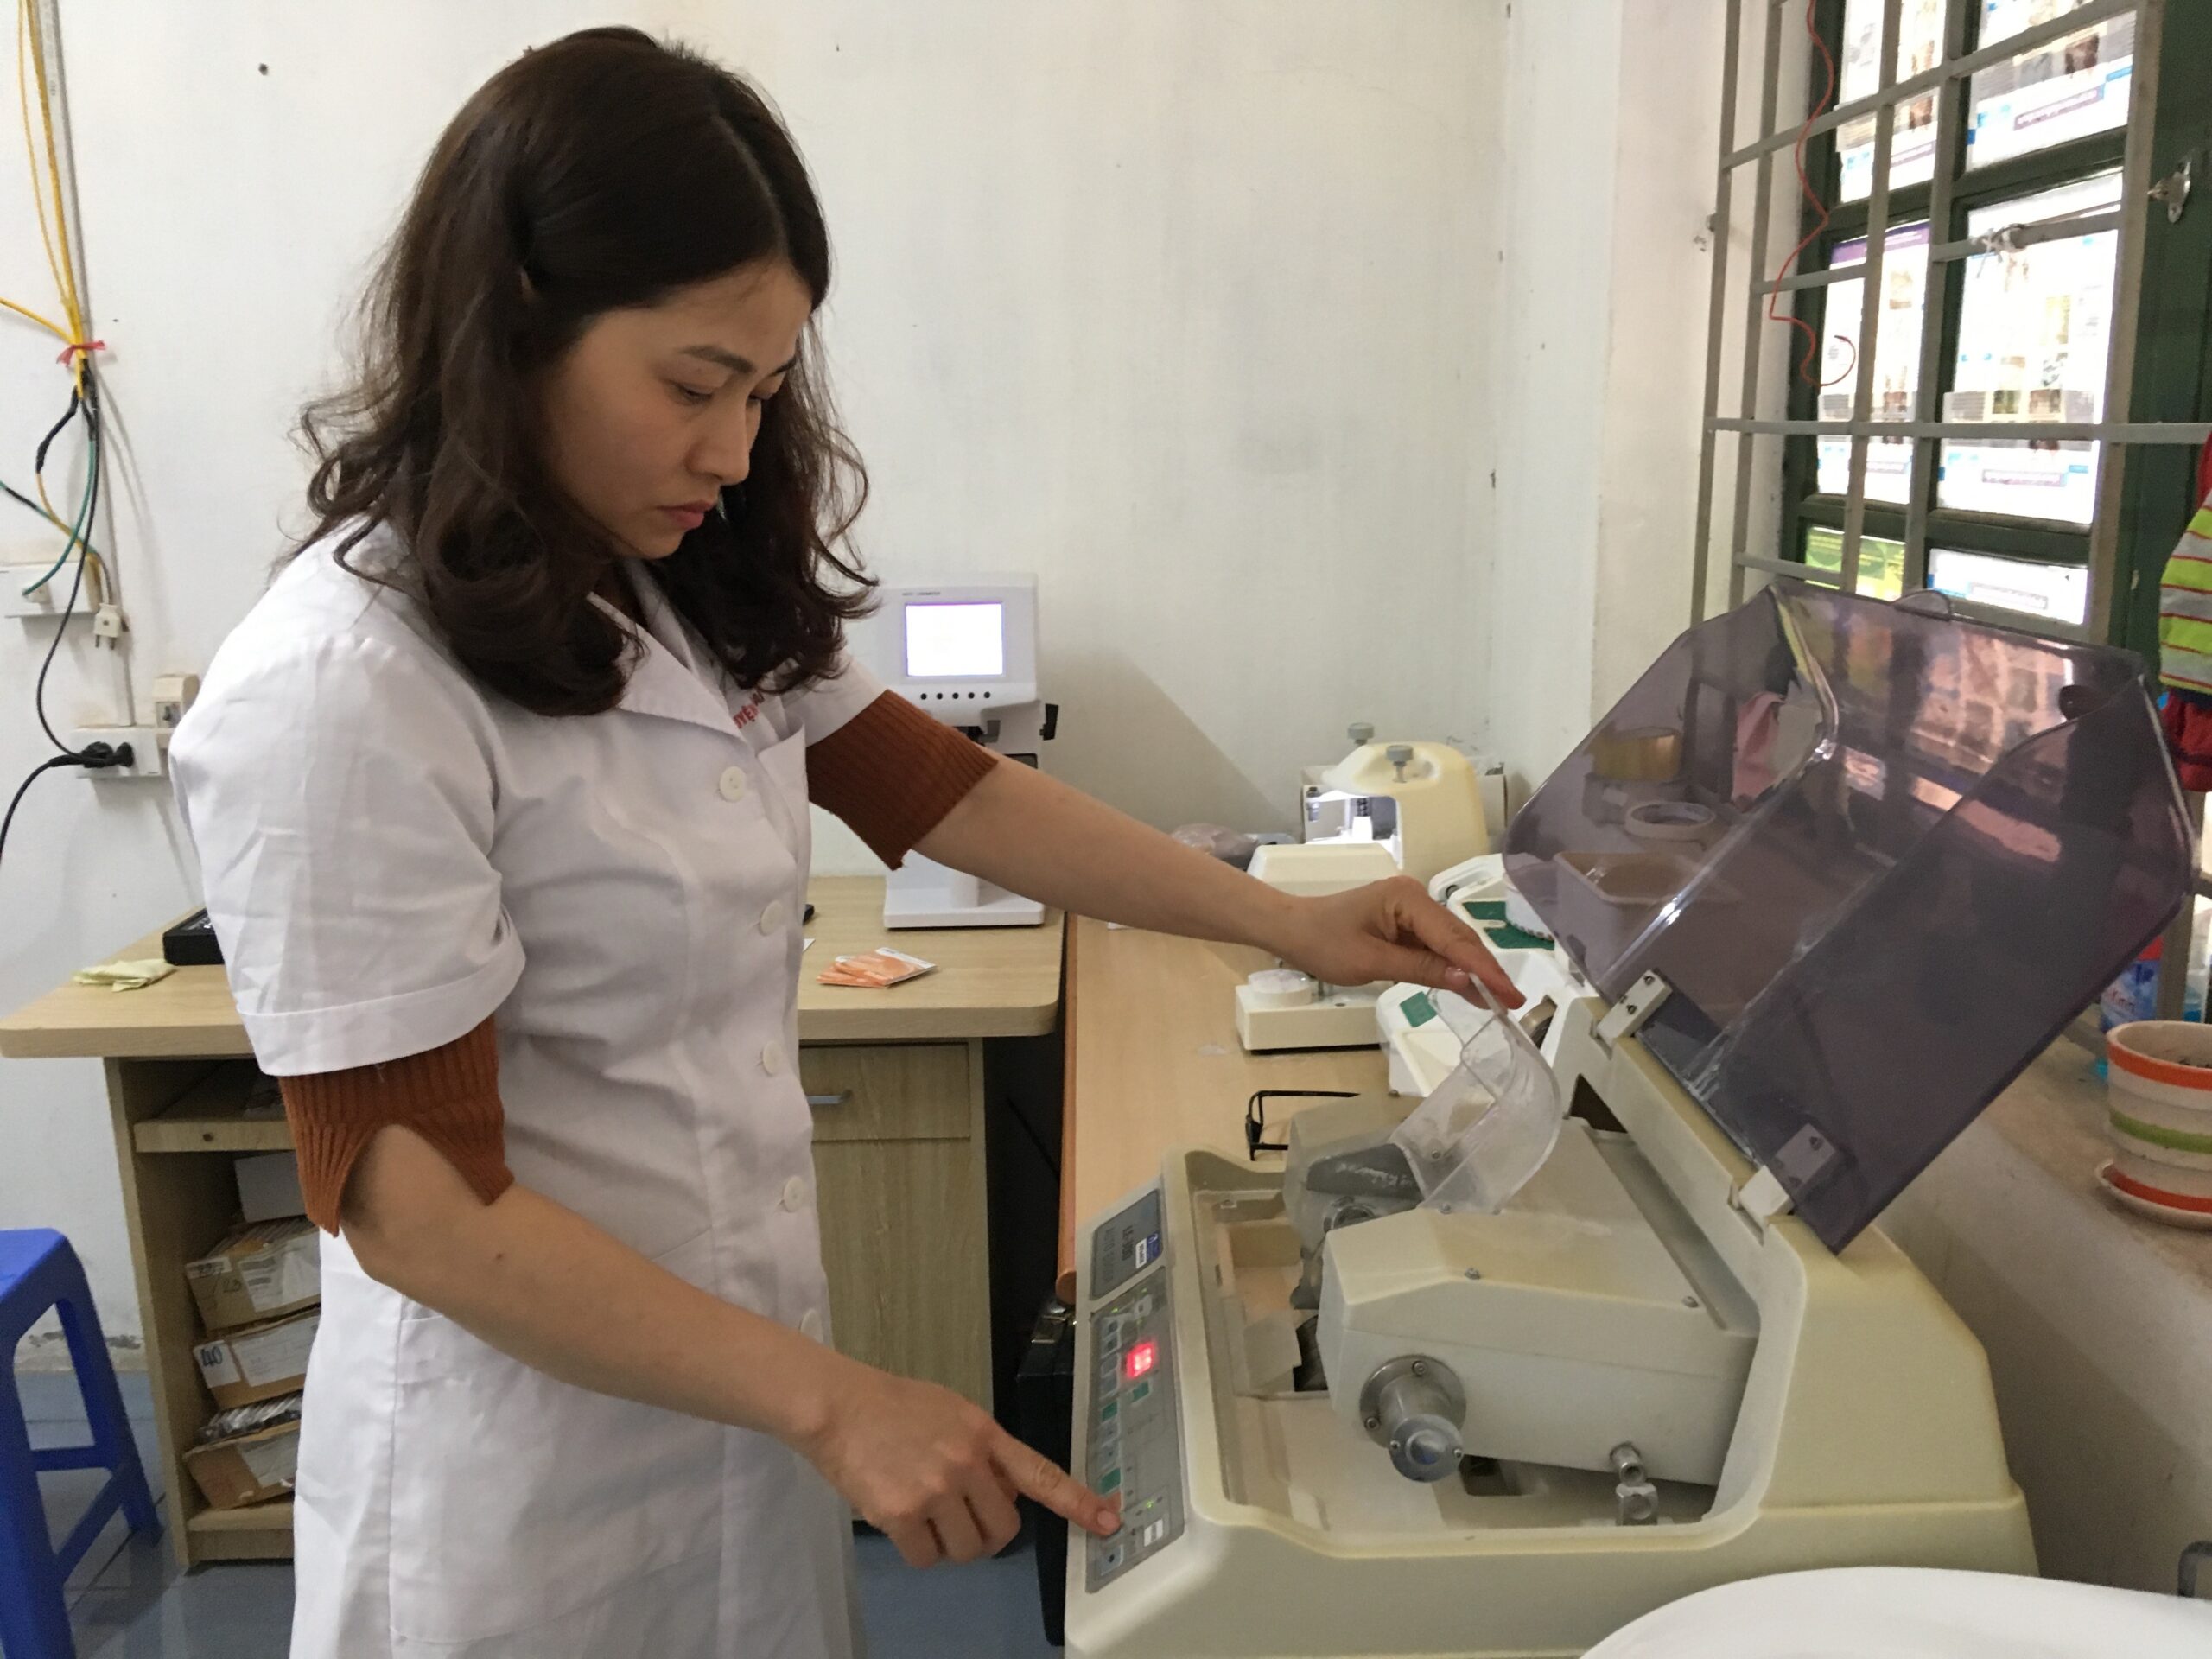 Ngoc pushing buttons and entering measurements into a machine